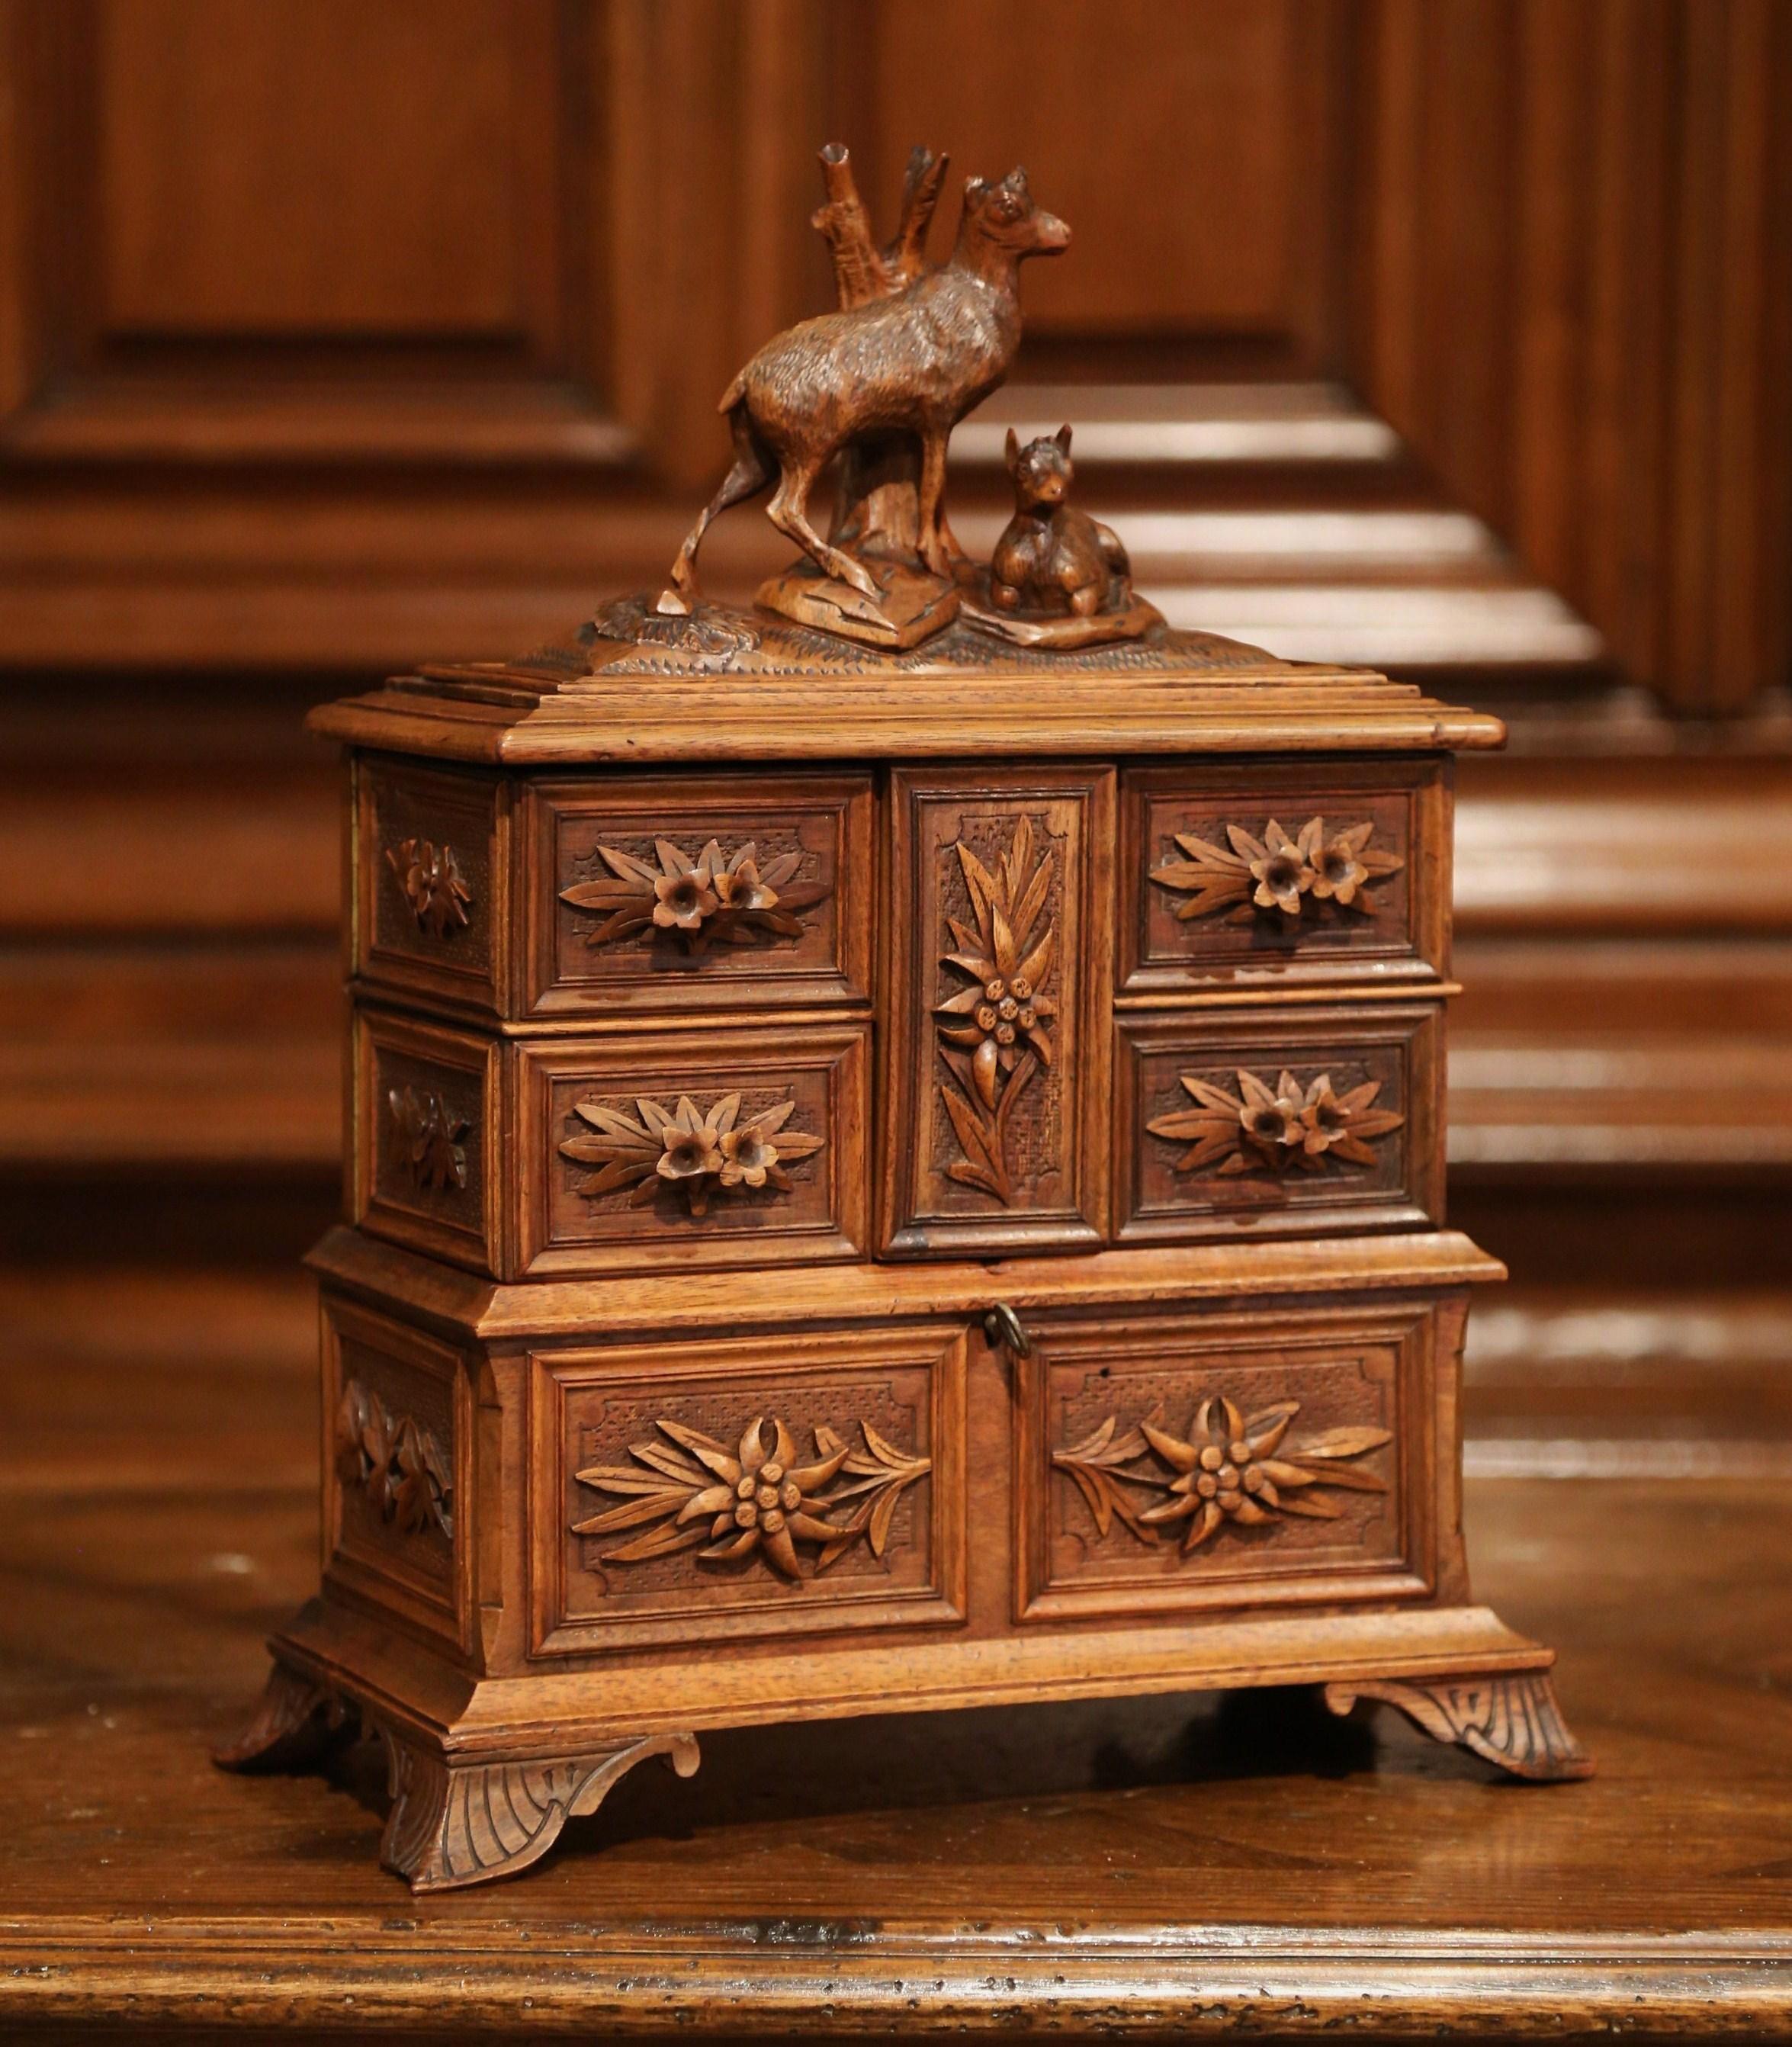 Silk 19th Century French Black Forest Carved Walnut Jewelry Box with Deer and Drawers